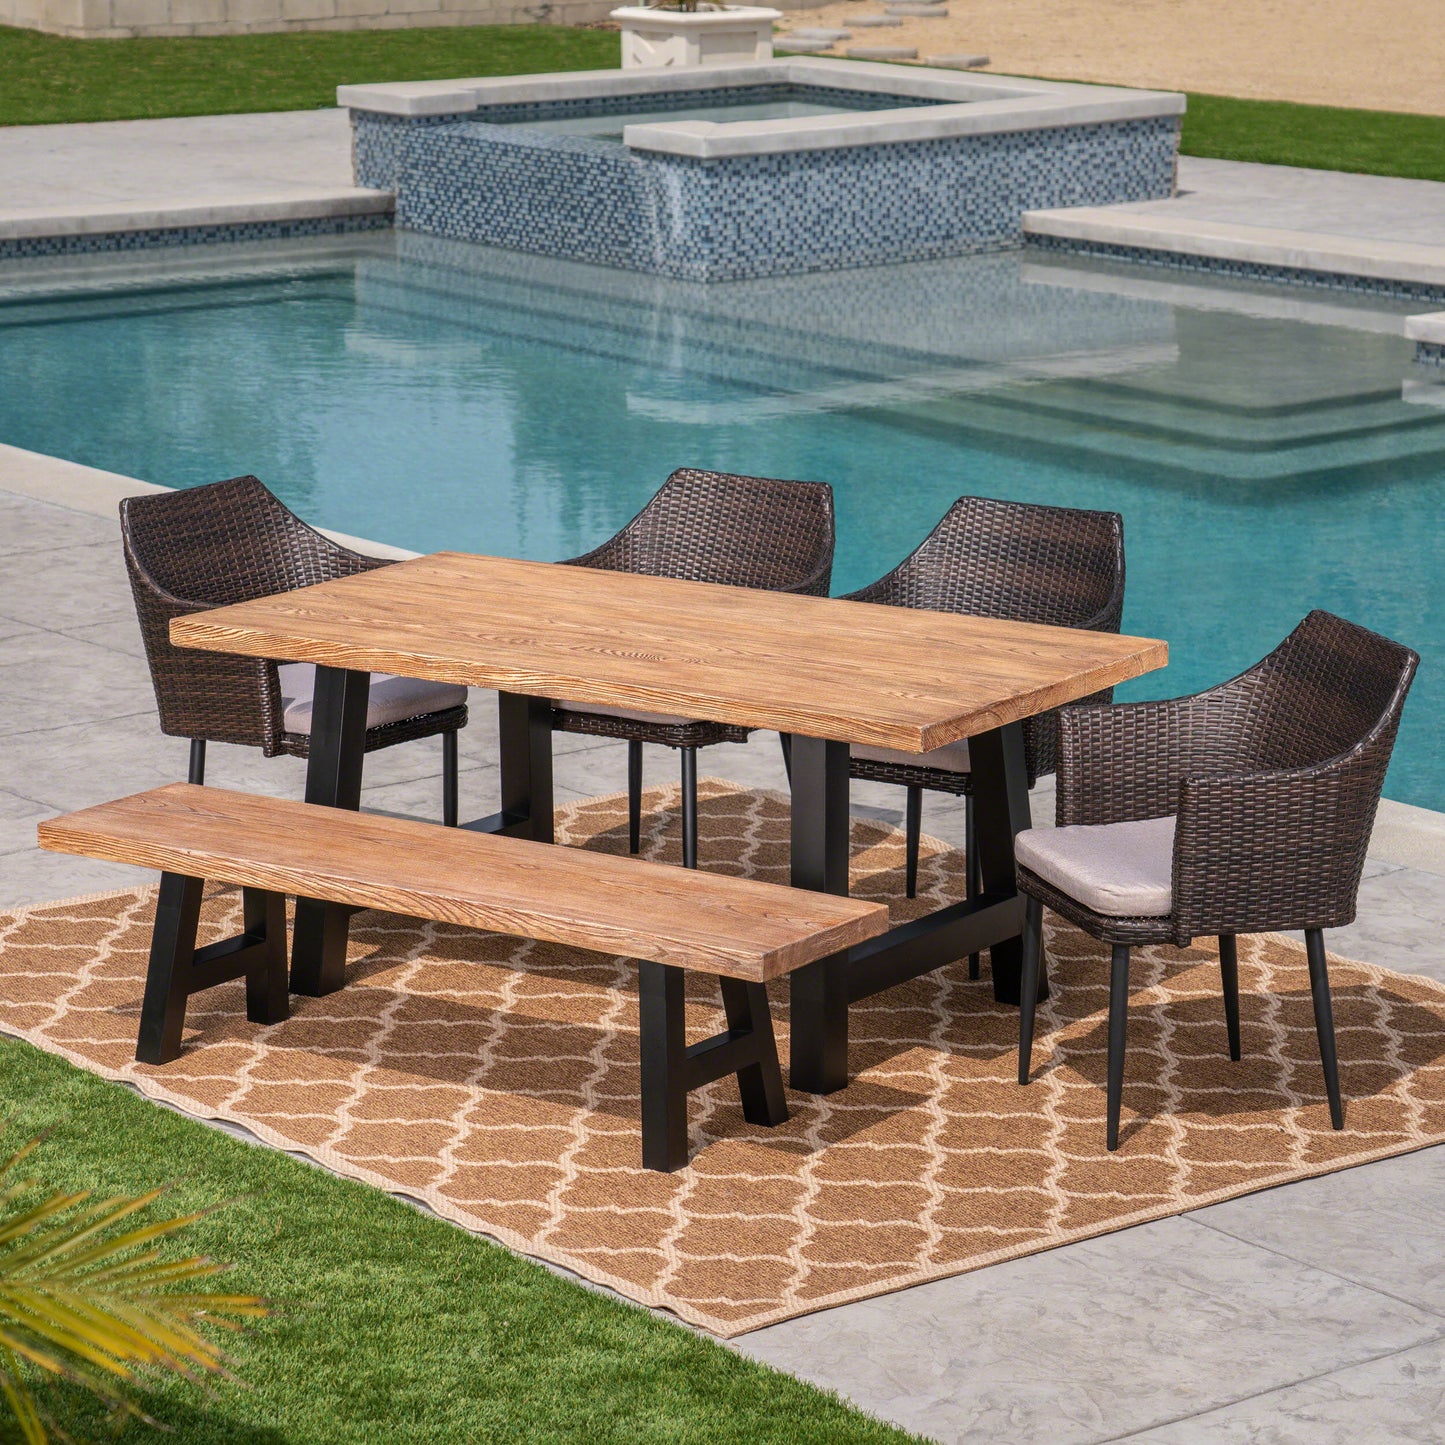 Blanche Outdoor 6 Piece Multibrown Wicker Dining Set with Natural Oak Finish Light Weight Concrete Table and Bench and Textured Beige Water Resistant Cushions